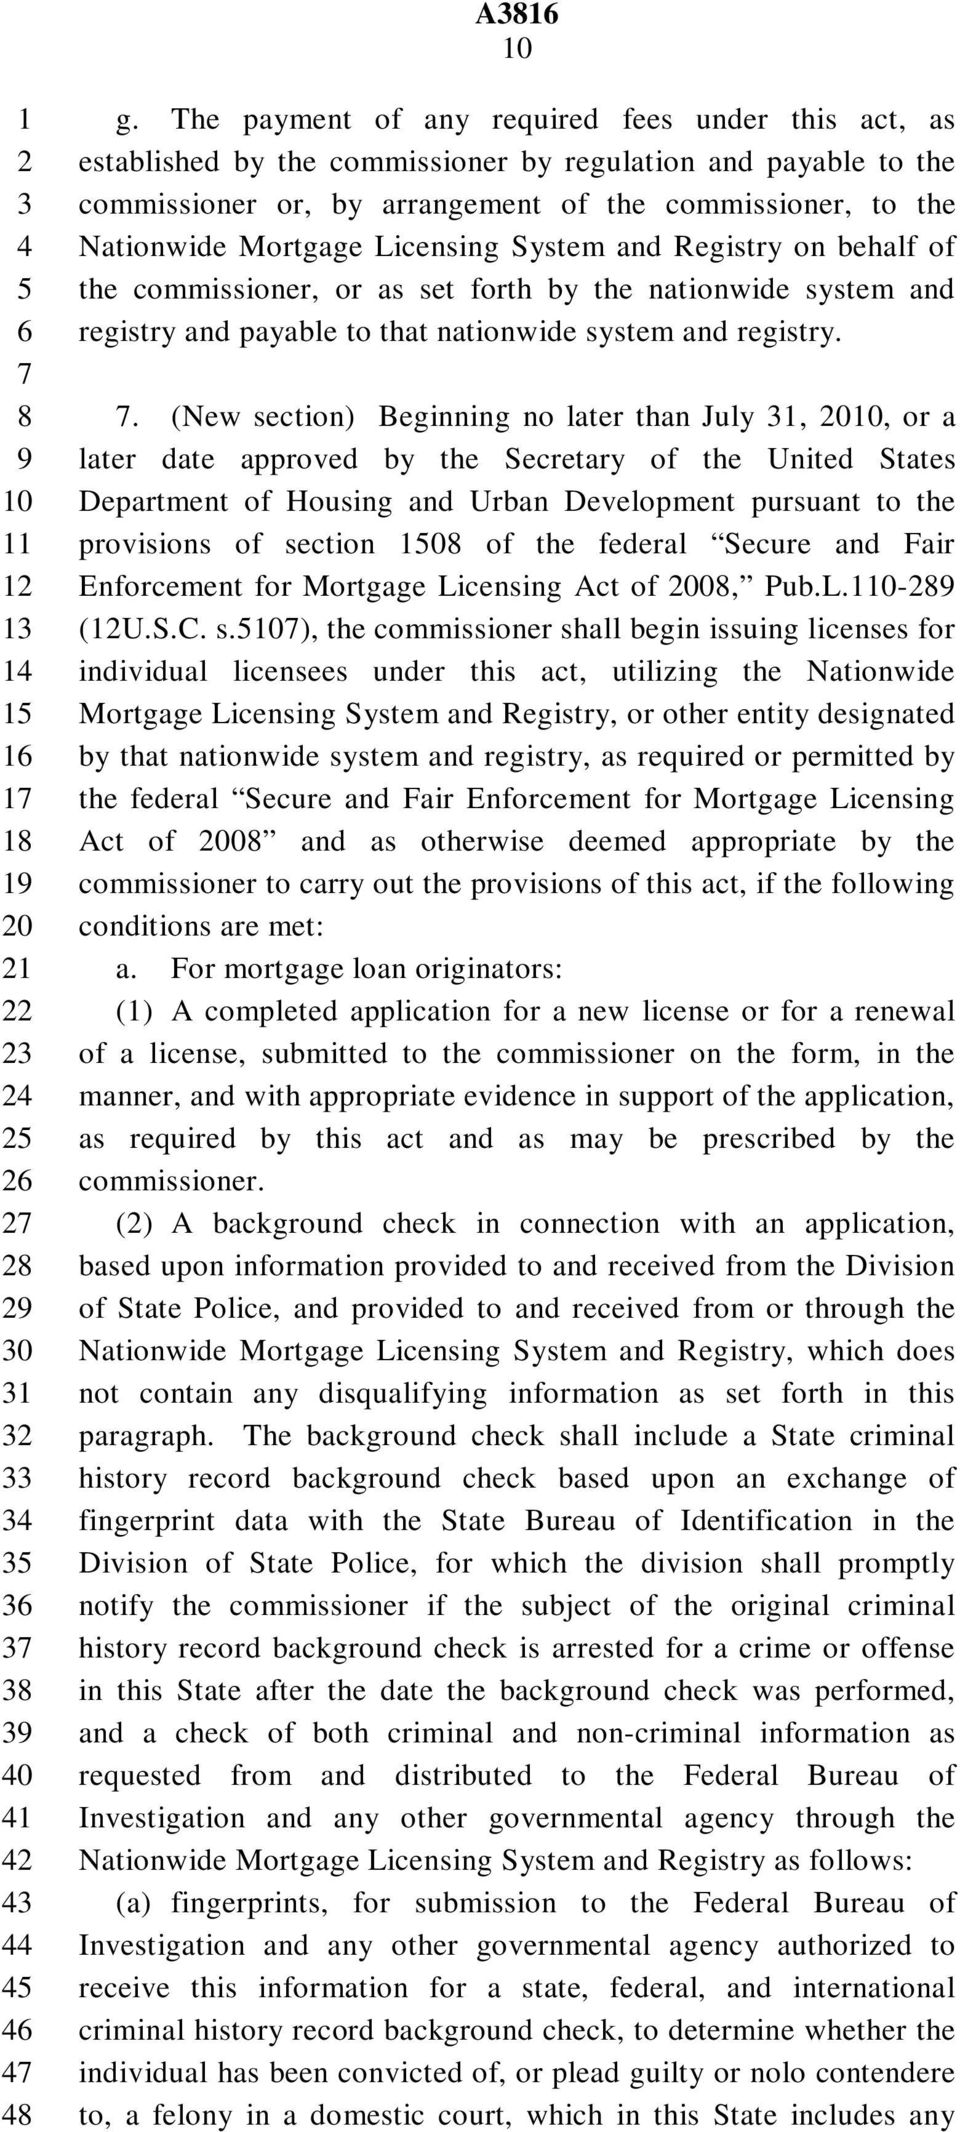 Licensing System and Registry on behalf of the commissioner, or as set forth by the nationwide system and registry and payable to that nationwide system and registry.